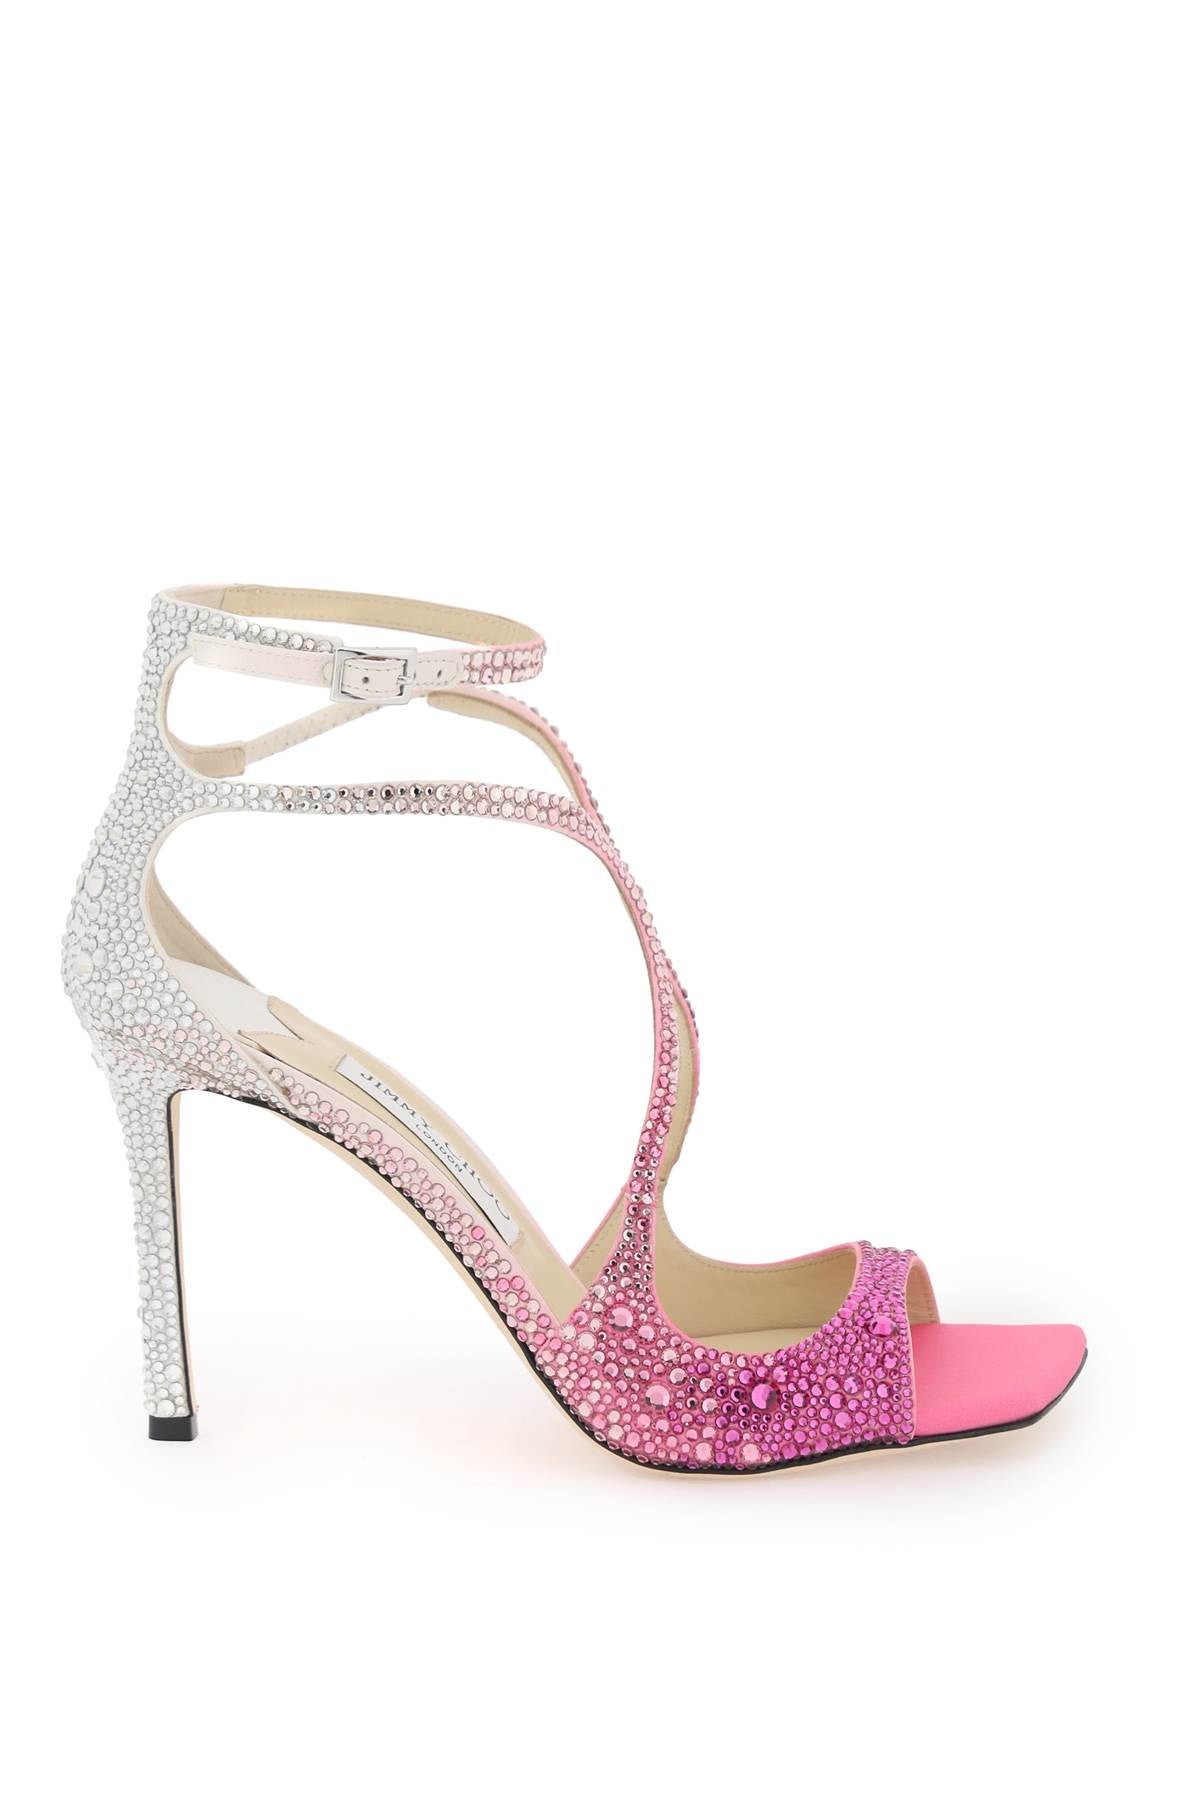 Jimmy choo azia 95 pumps with crystals-0